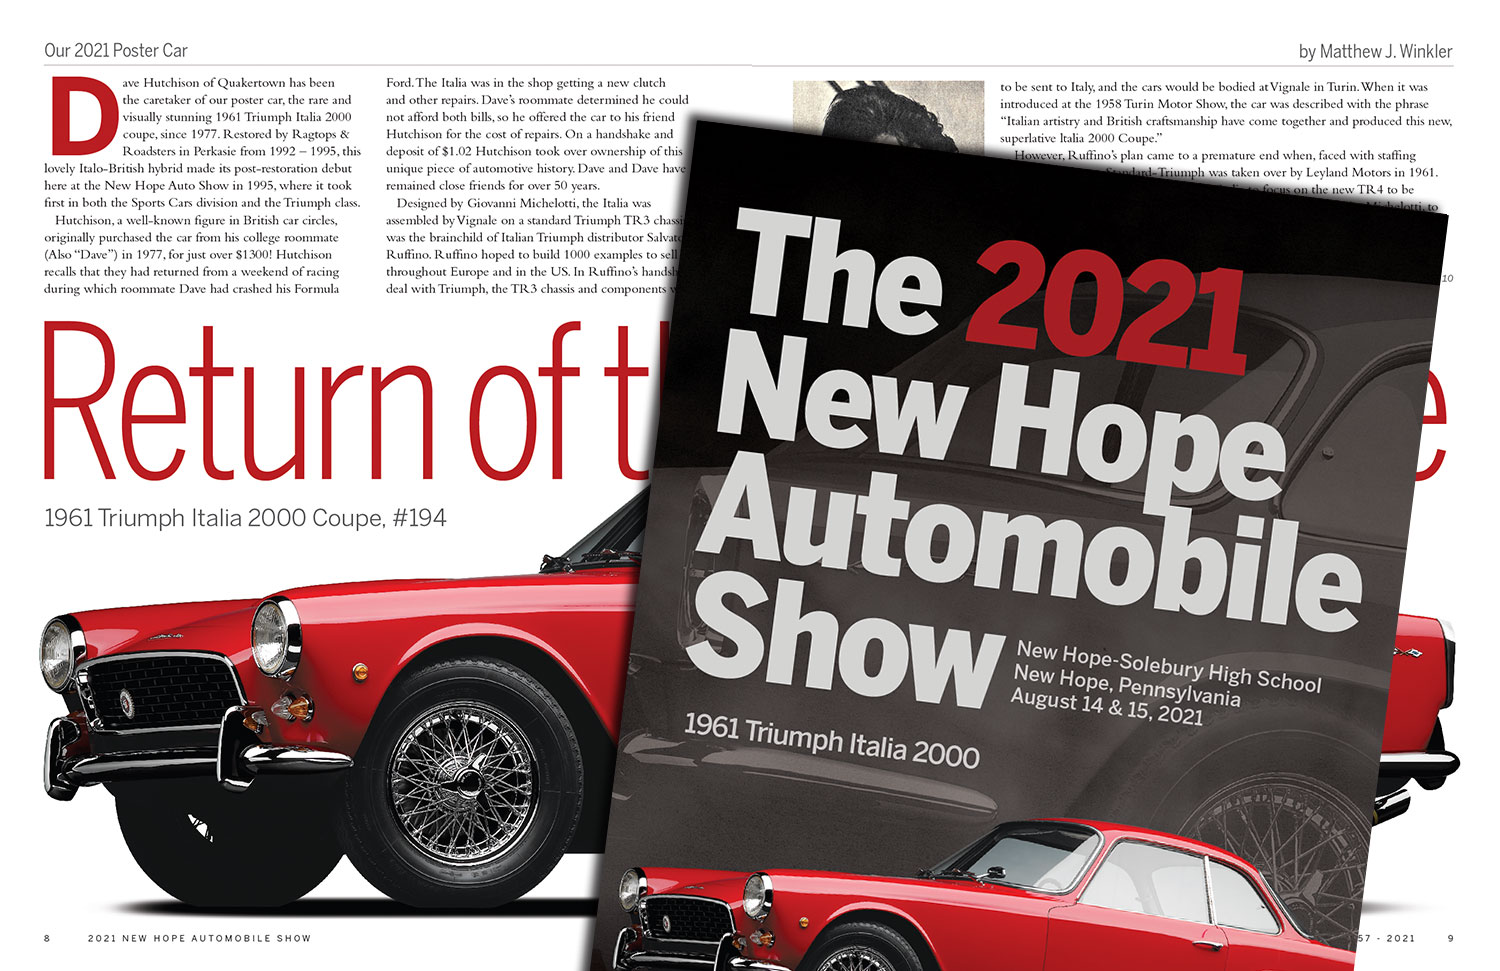 Inside spread and cover of 2021 New Hope Automobile Show program book